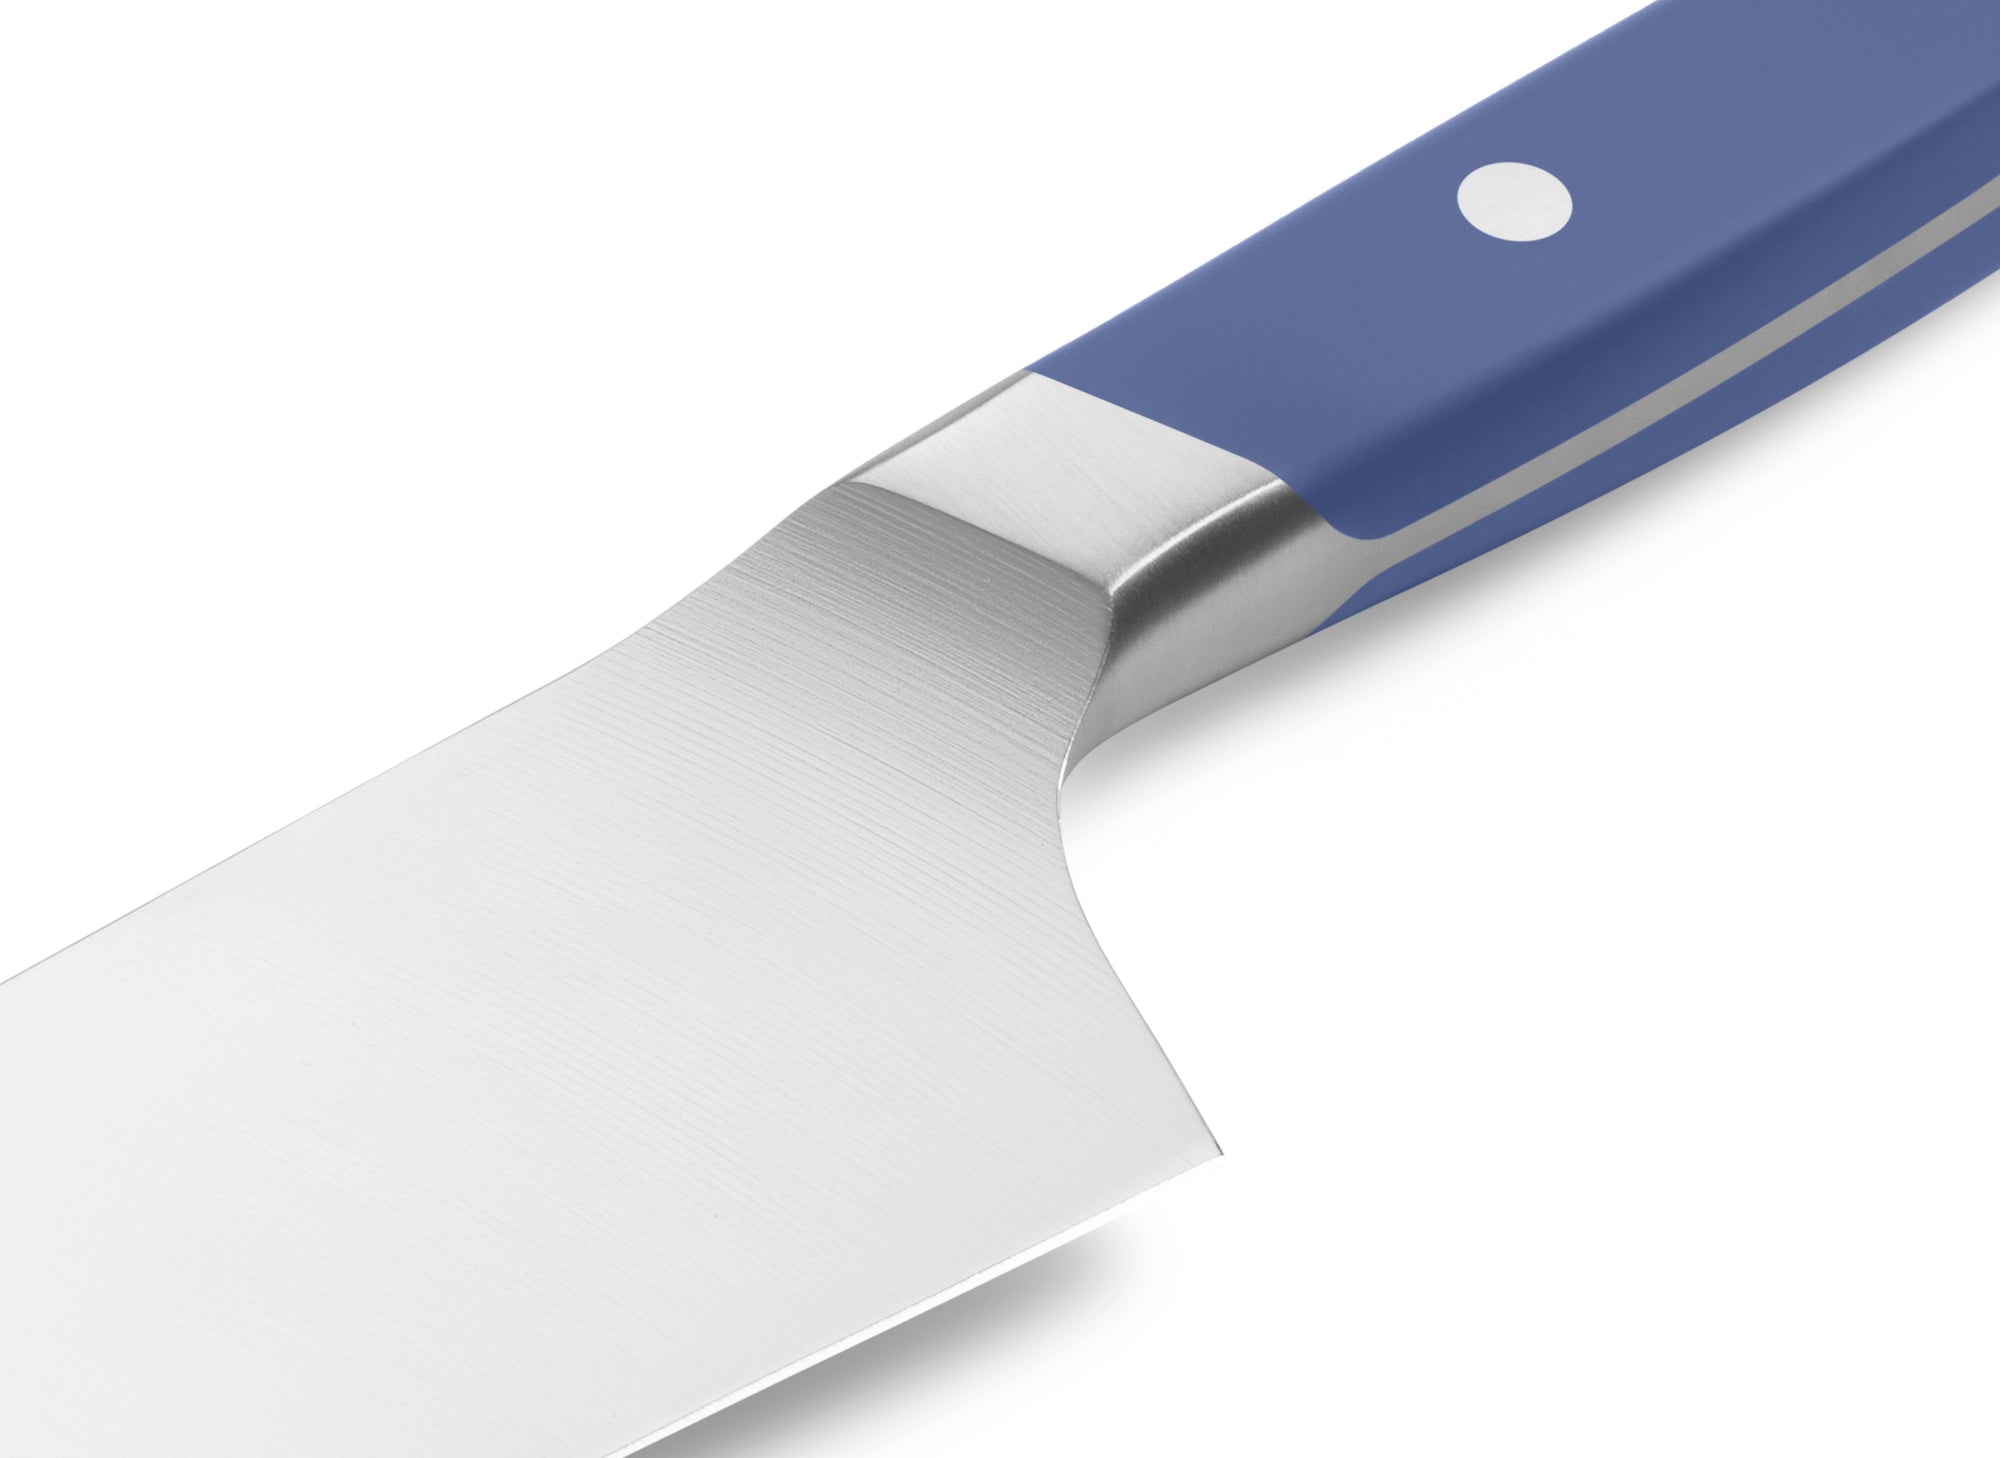 The Misen Santoku Knife in blue features a unique sloped bolster.